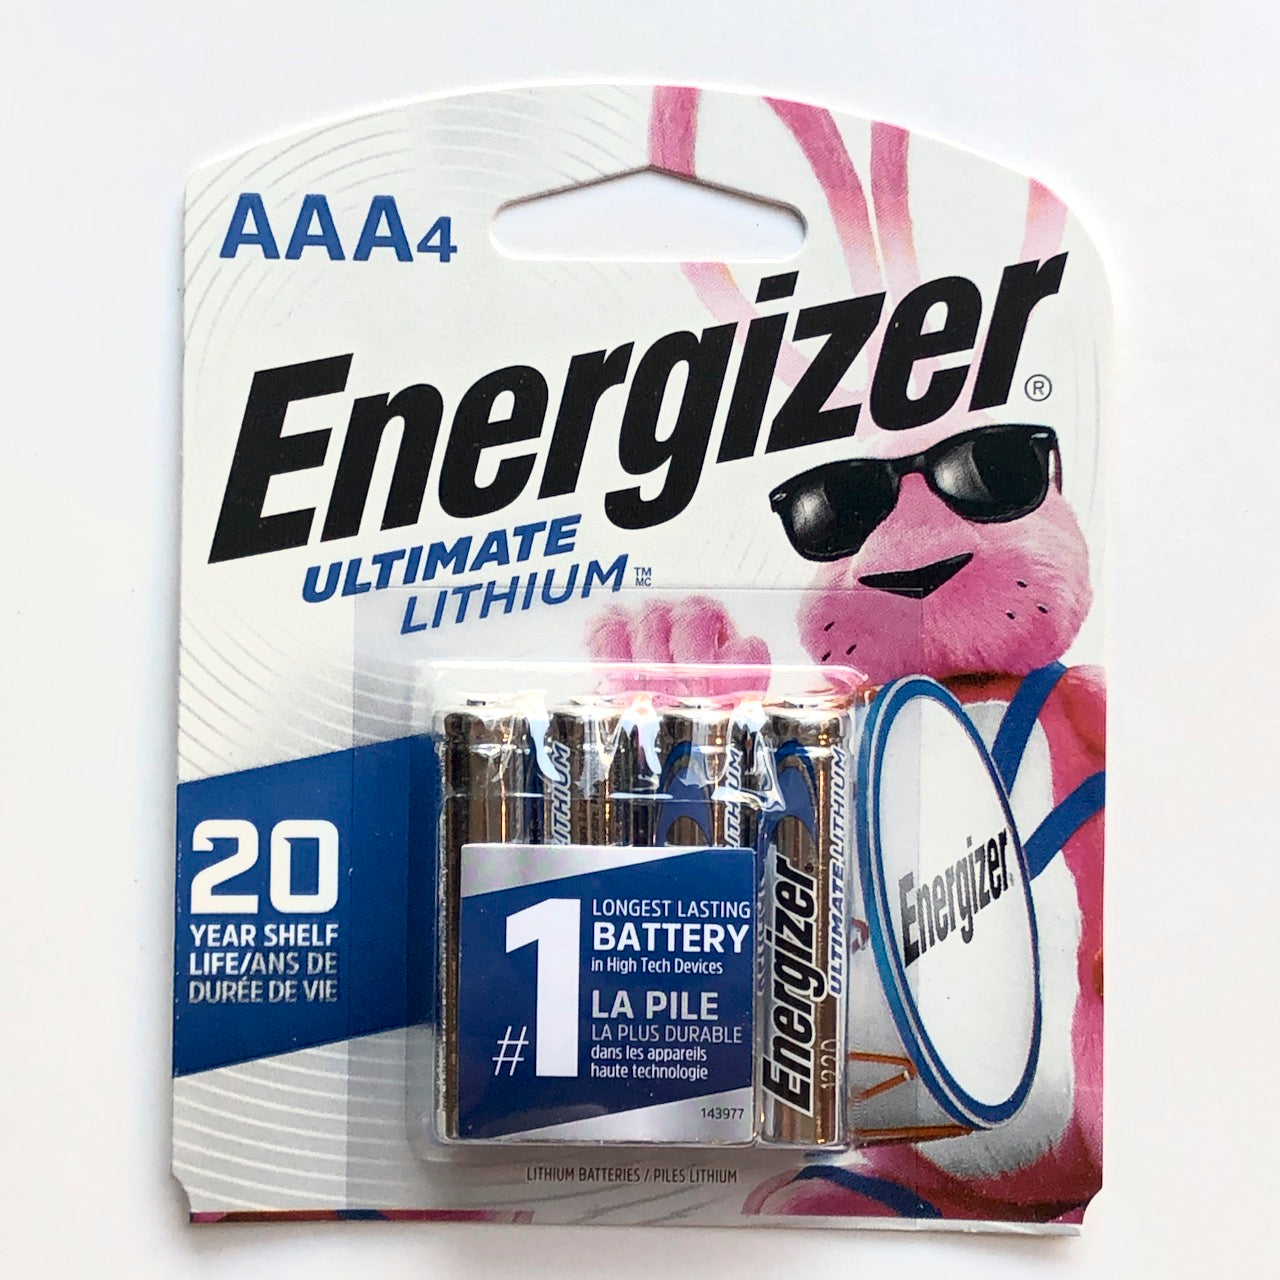 Energizer Ultimate Lithium AAA (4 pack)